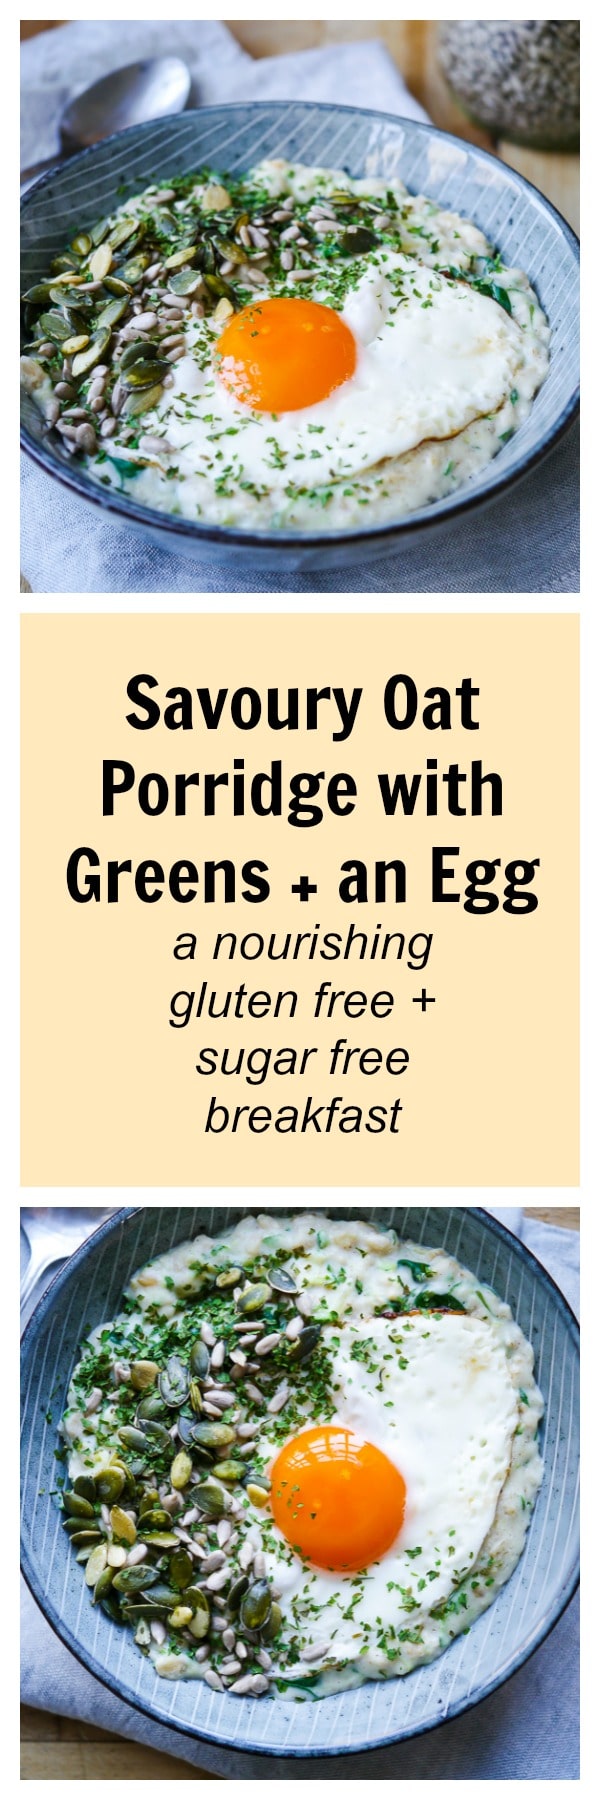 Savoury Oat Porridge with Greens and an Egg | Nourish Everyday | Savoury Oat Porridge is a little different but so incredibly delicious, plus it's a healthy, sugar free way to start the day!